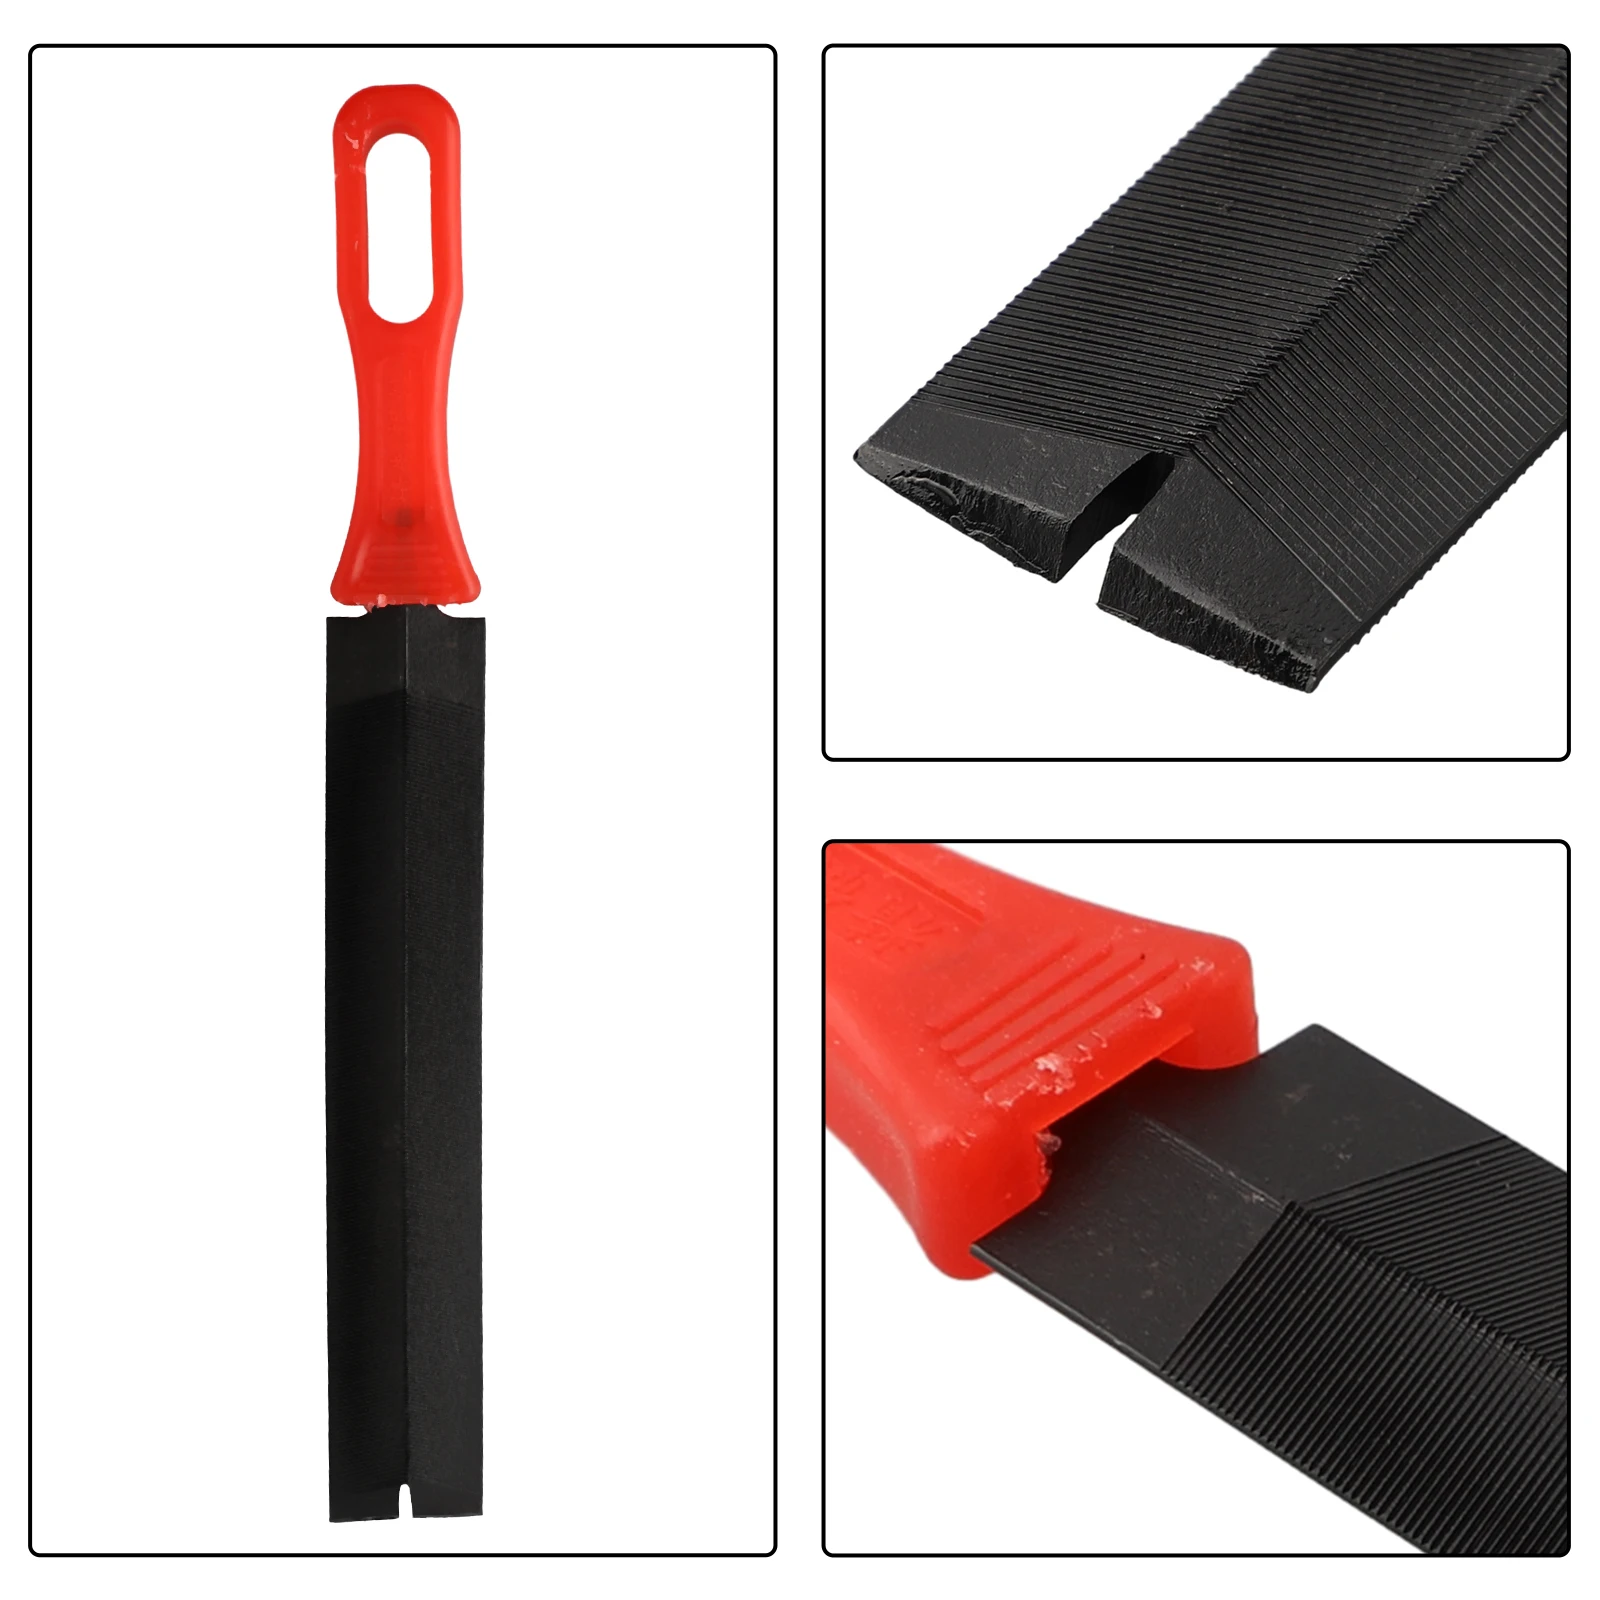 

Brand New Durable Grinding Rasp Tool Practical 150/200mm Saw Files 1pcs Assembly Steel+Rubber Carving Diamond-Shaped